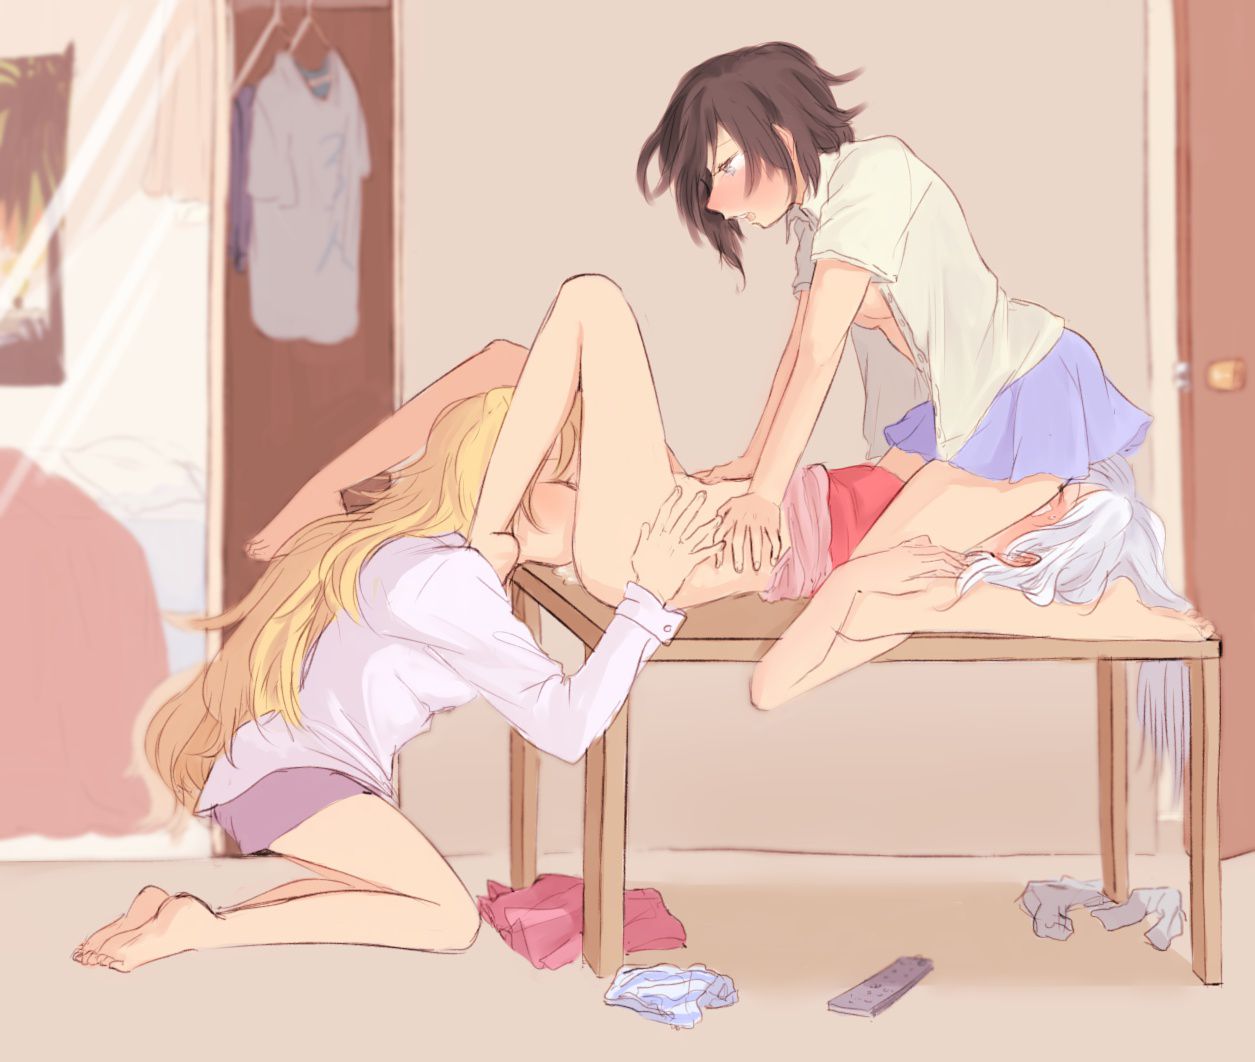 【Erotic Anime Summary】 Erotic image of girls playing lesbi kunni with each other 【Secondary erotica】 10